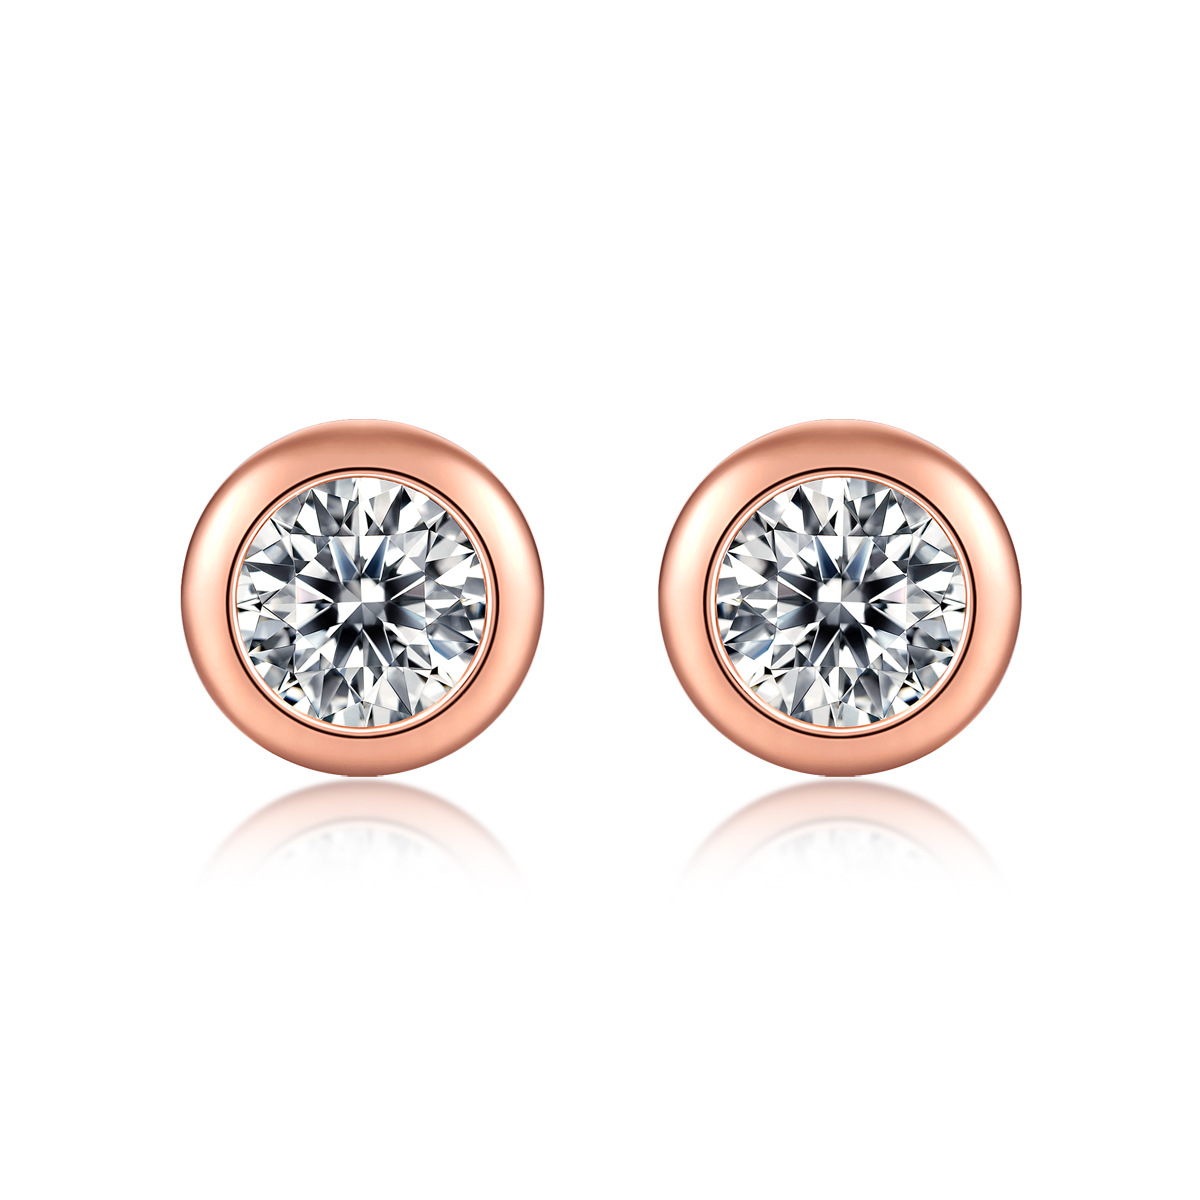 50 Points 18K Gold Plated Moissanite Stone Sterling Silver Earrings